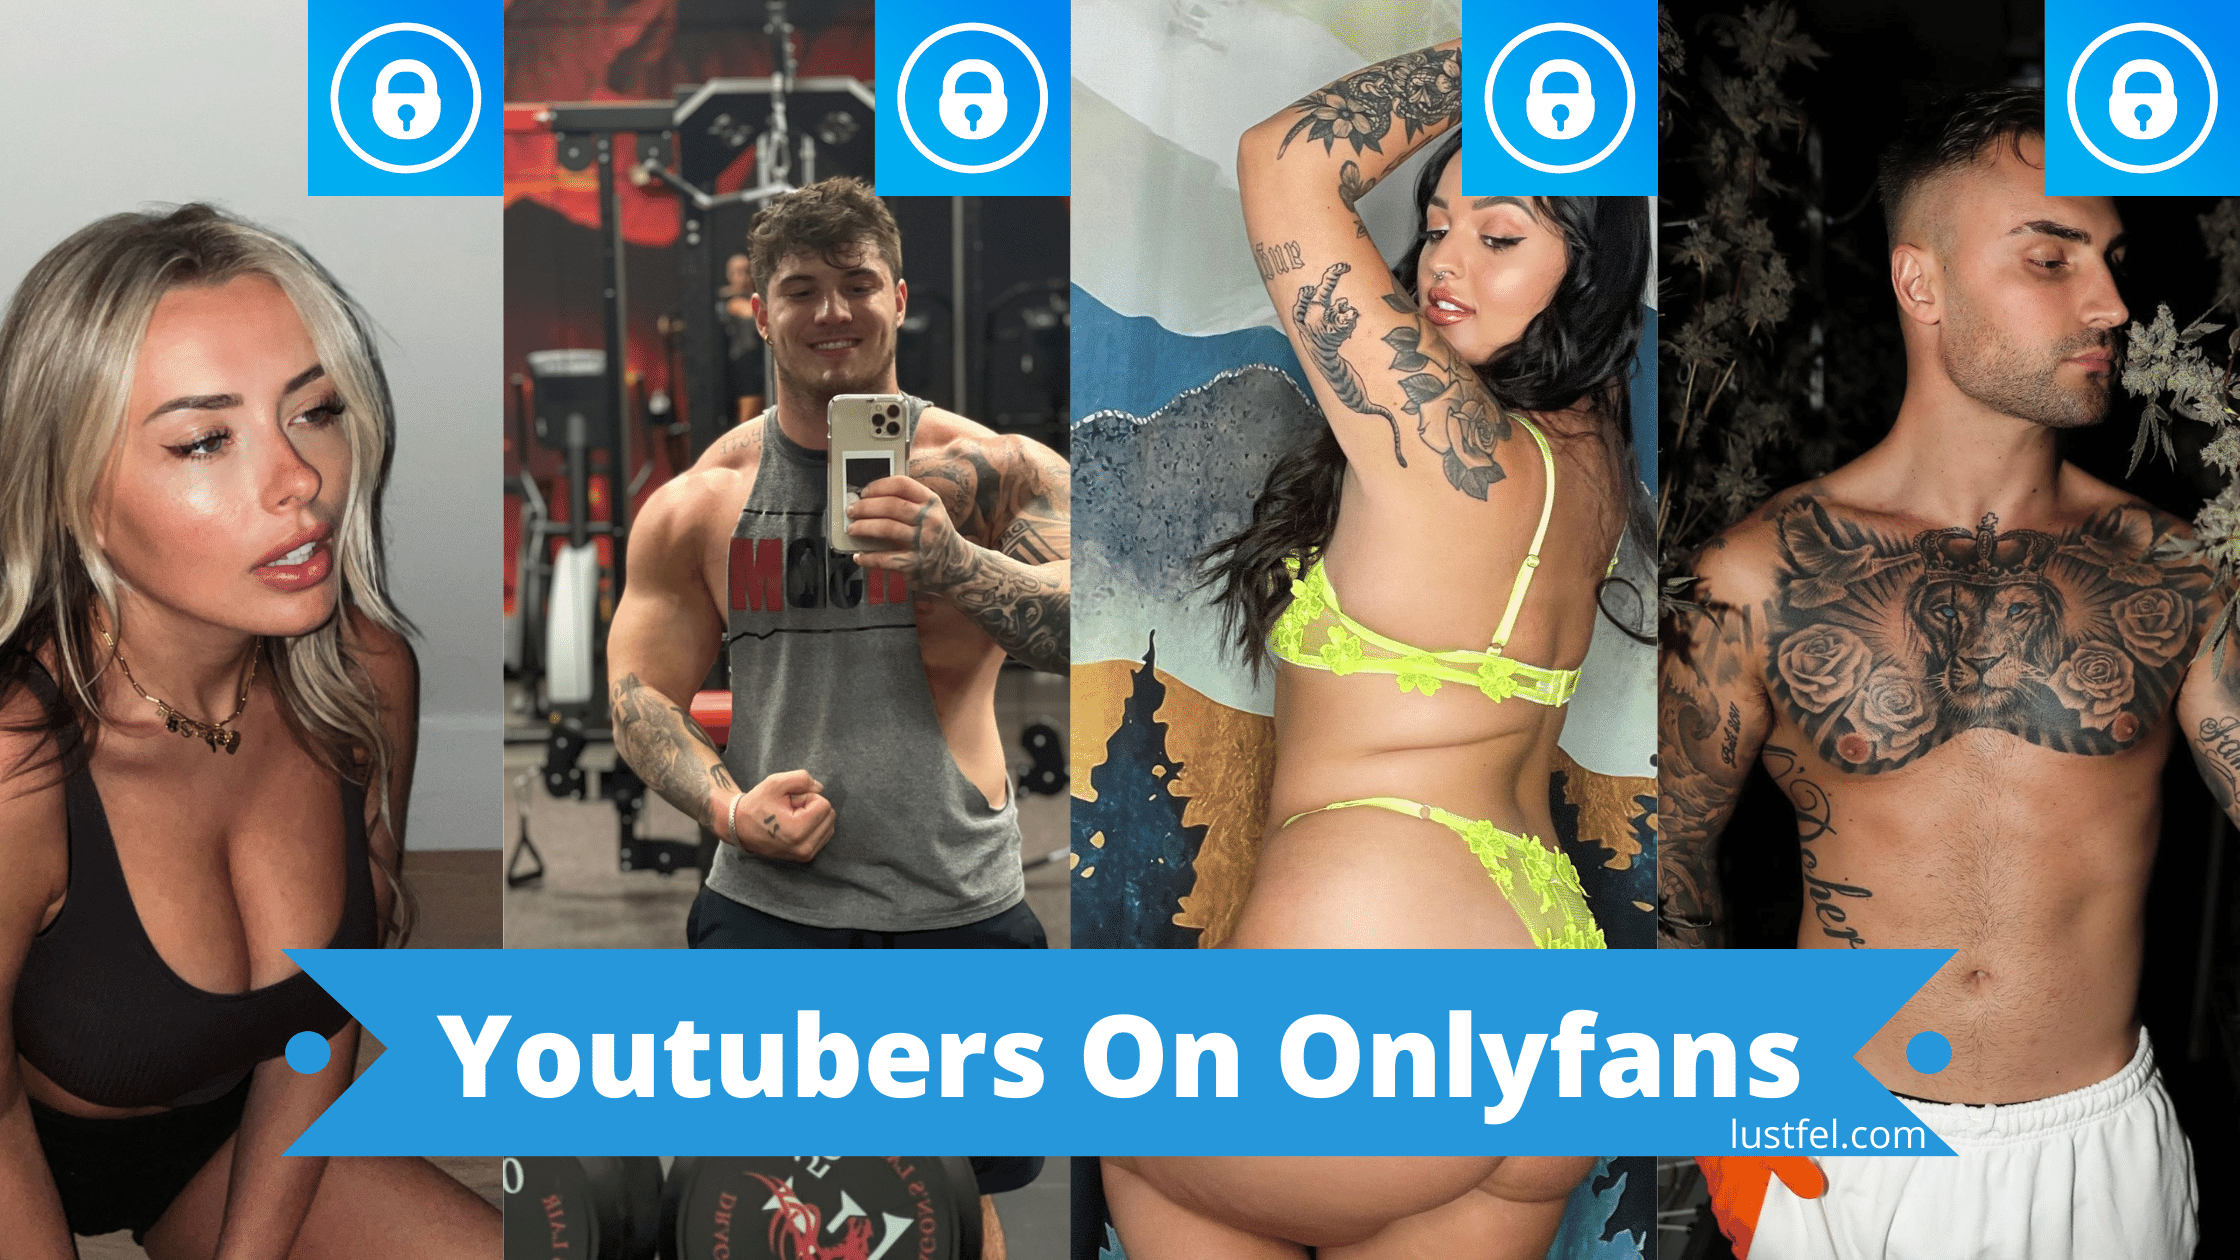 Youtbers with onlyfans